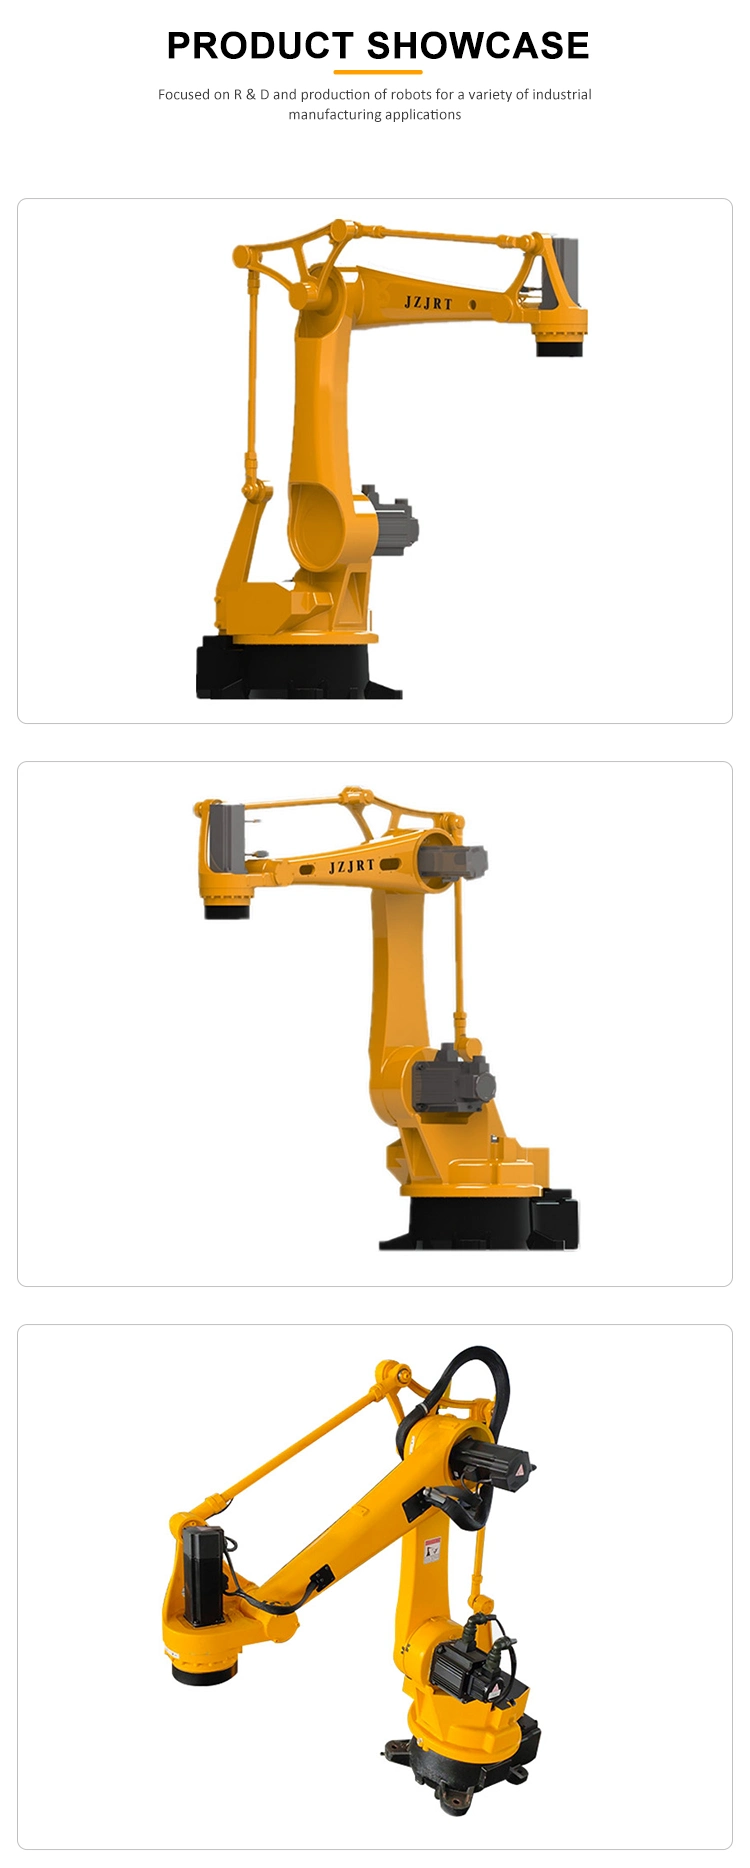 New Arrival Industrial CNC Arm 4 Axis Robot Price for Industrial Robot